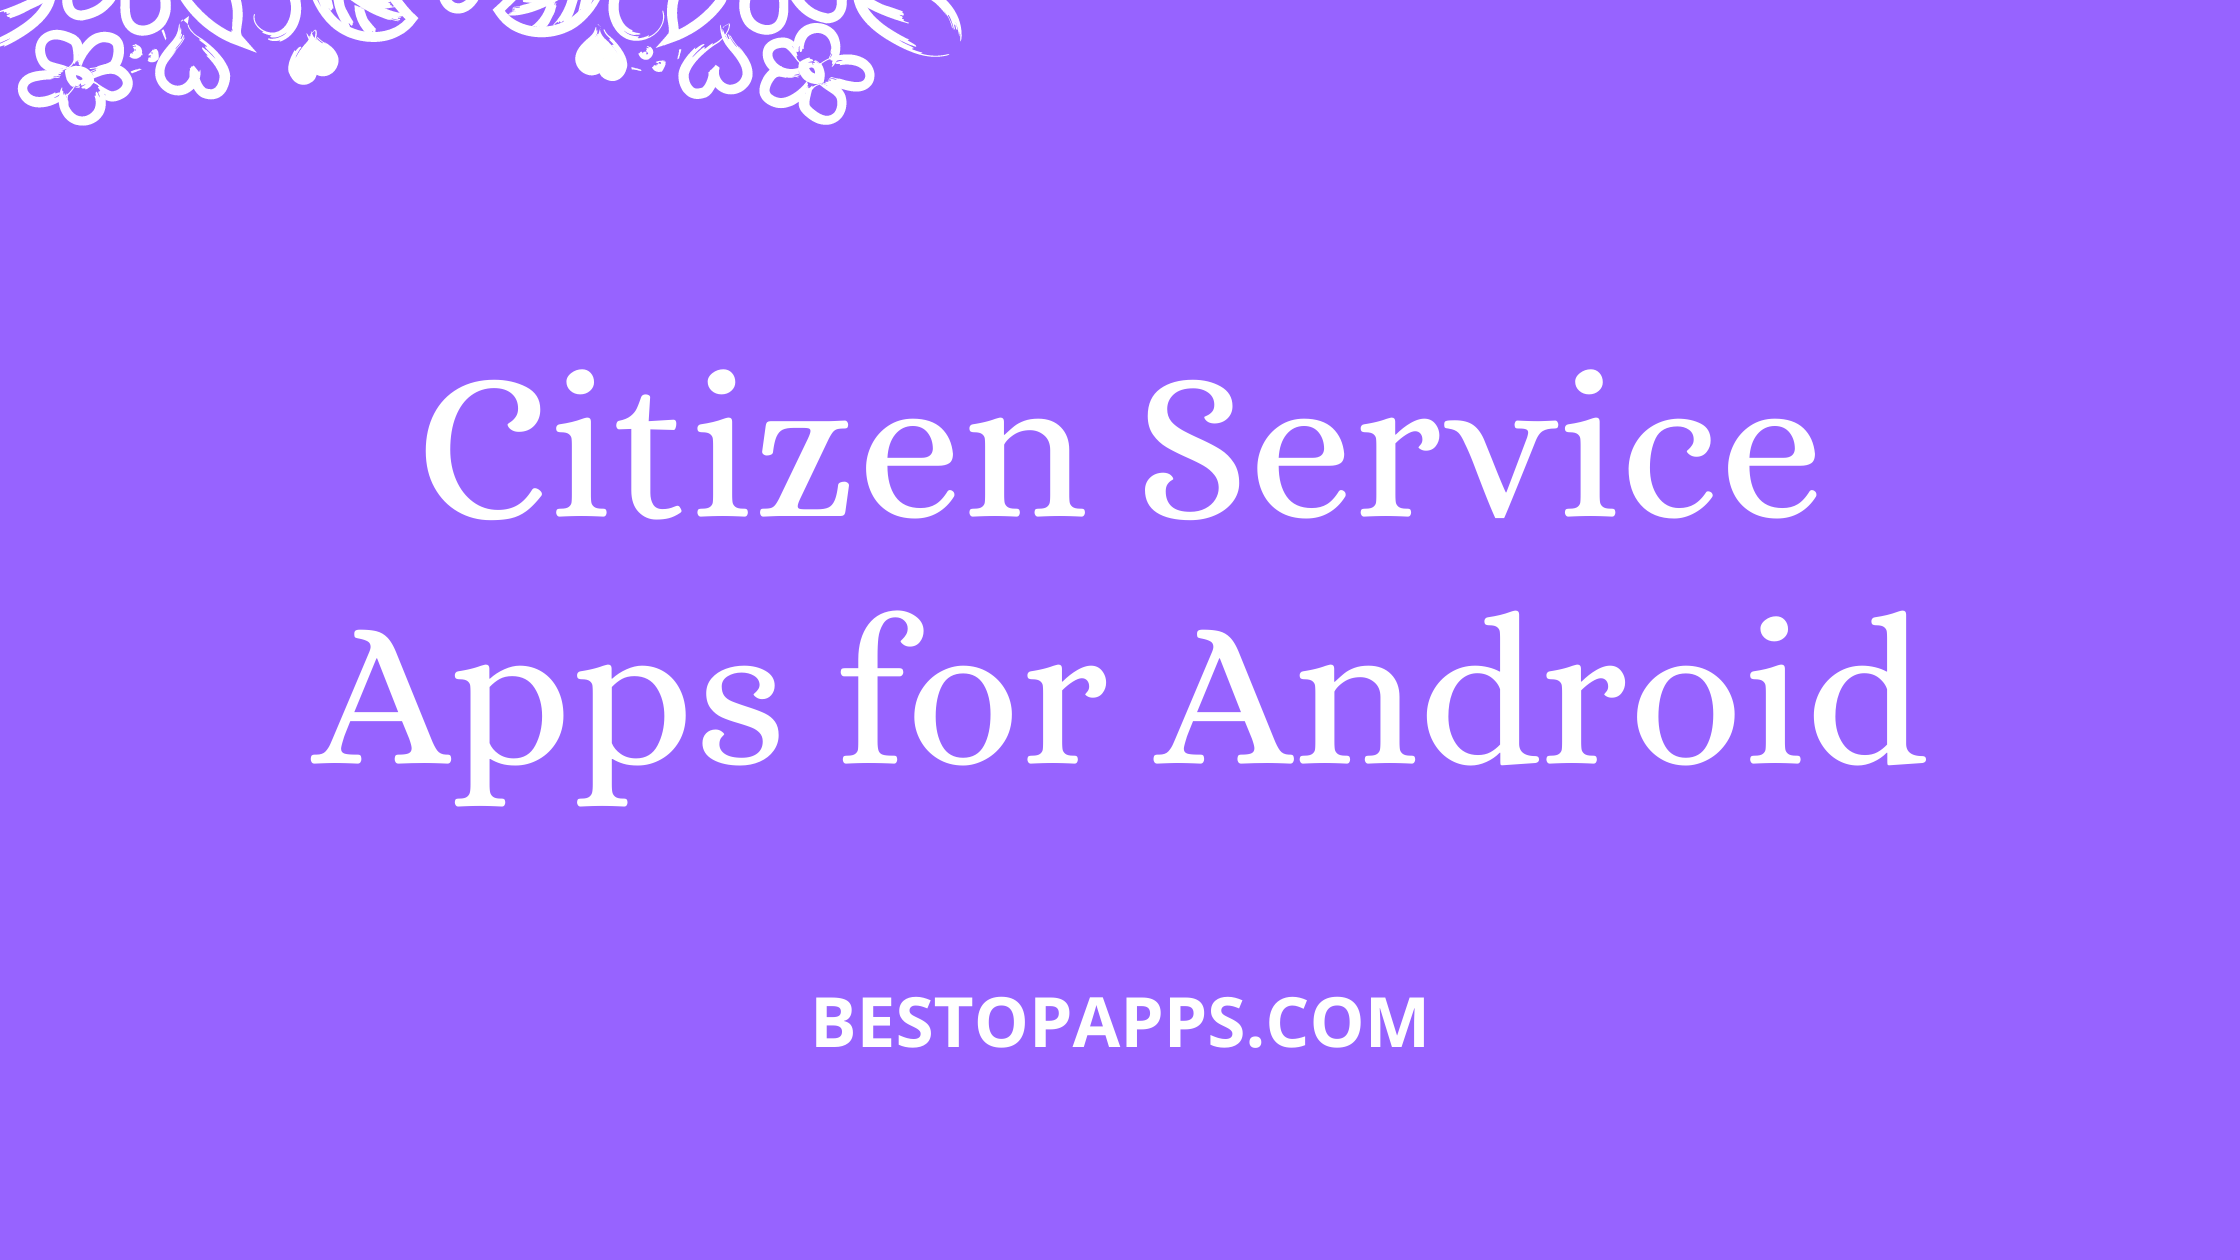 Citizen Service Apps for Android